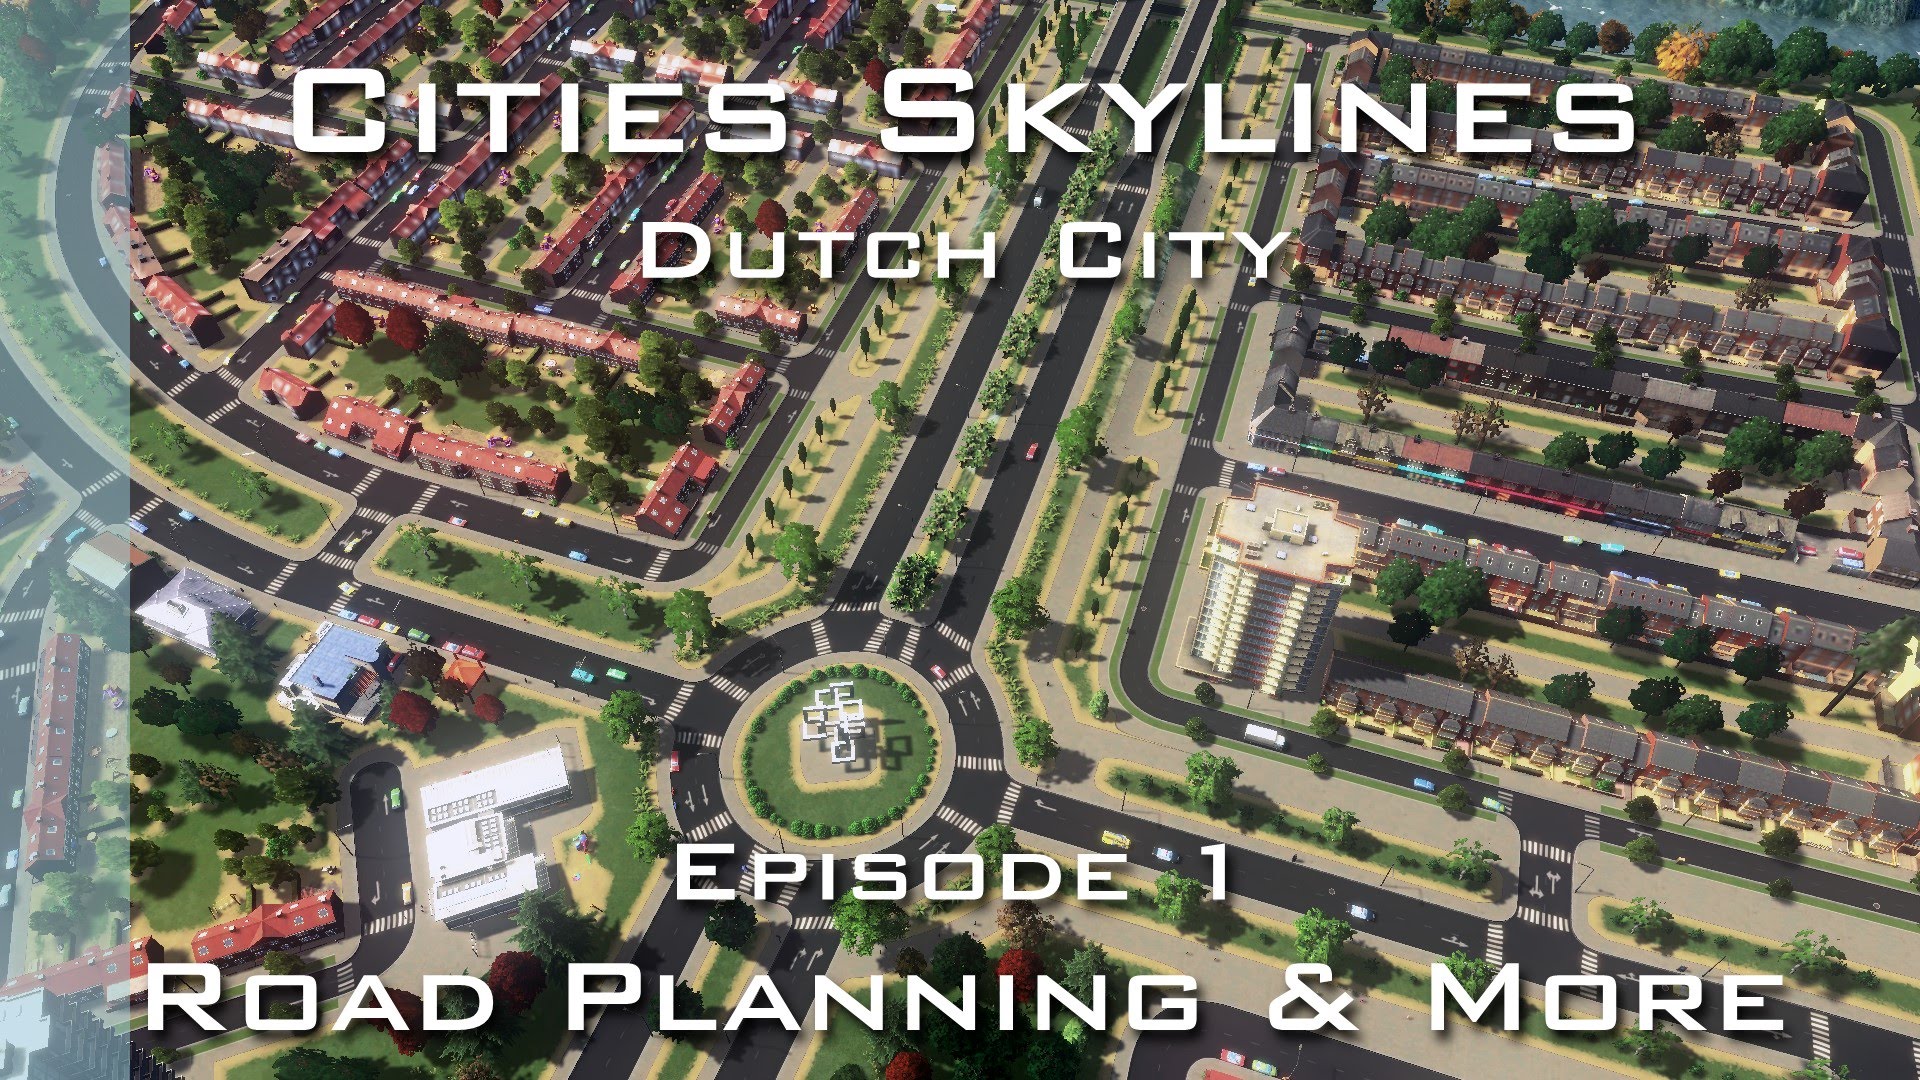 Cities Skylines: Dutch City - Episode 1 - Road Planning & More - YouTube